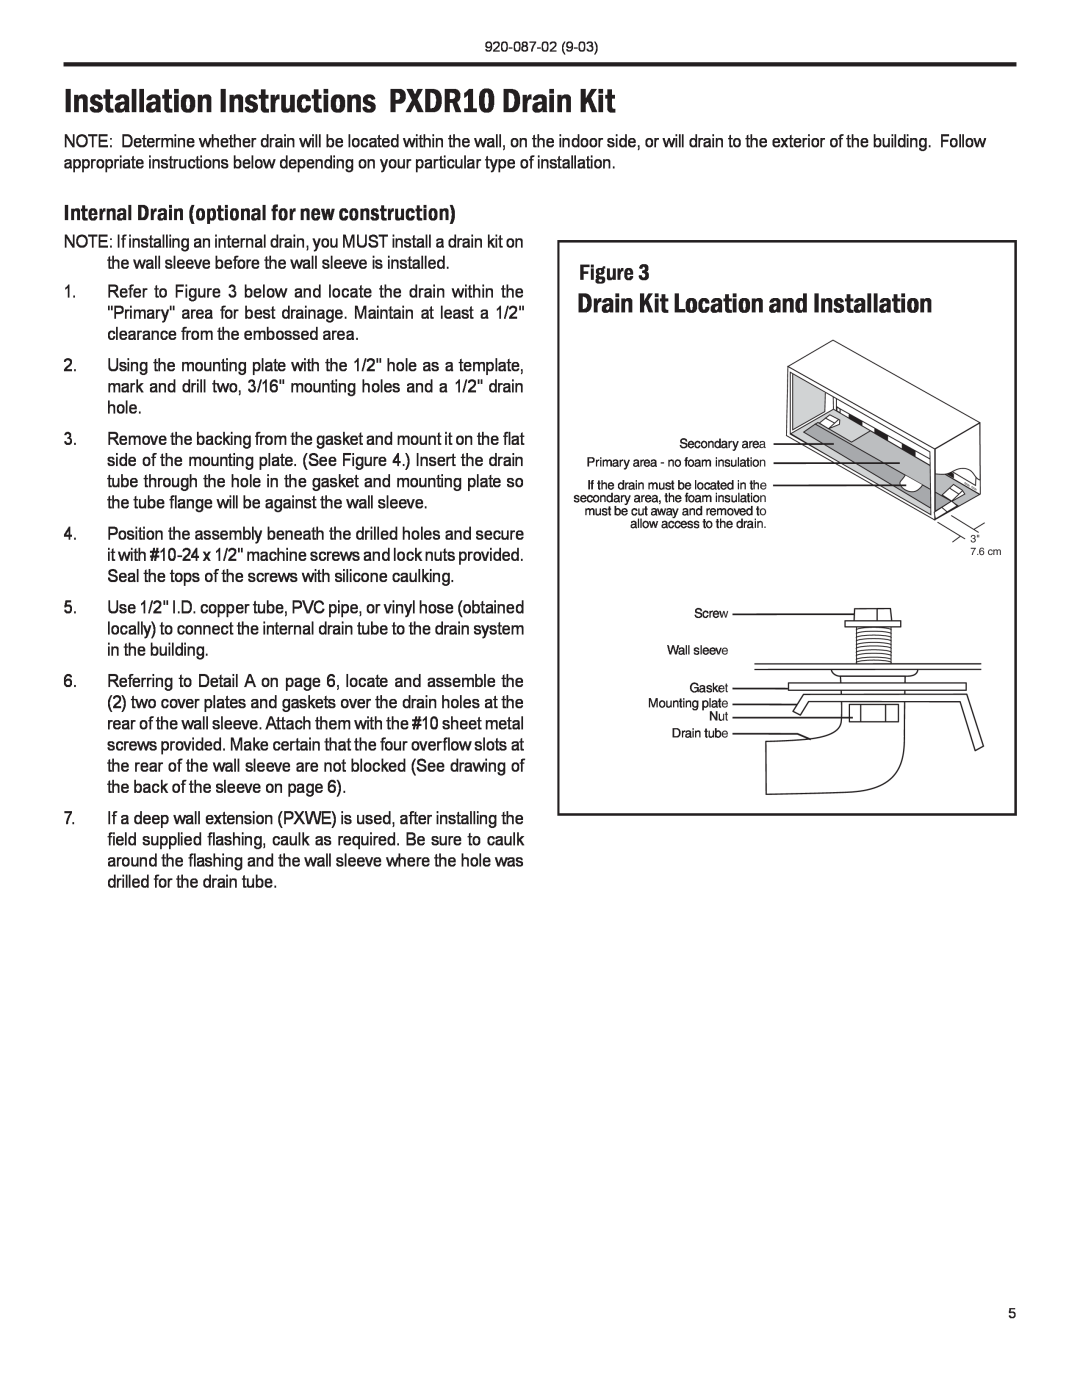 Friedrich PTAC operation manual Installation Instructions PXDR10 Drain Kit, Drain Kit Location and Installation 